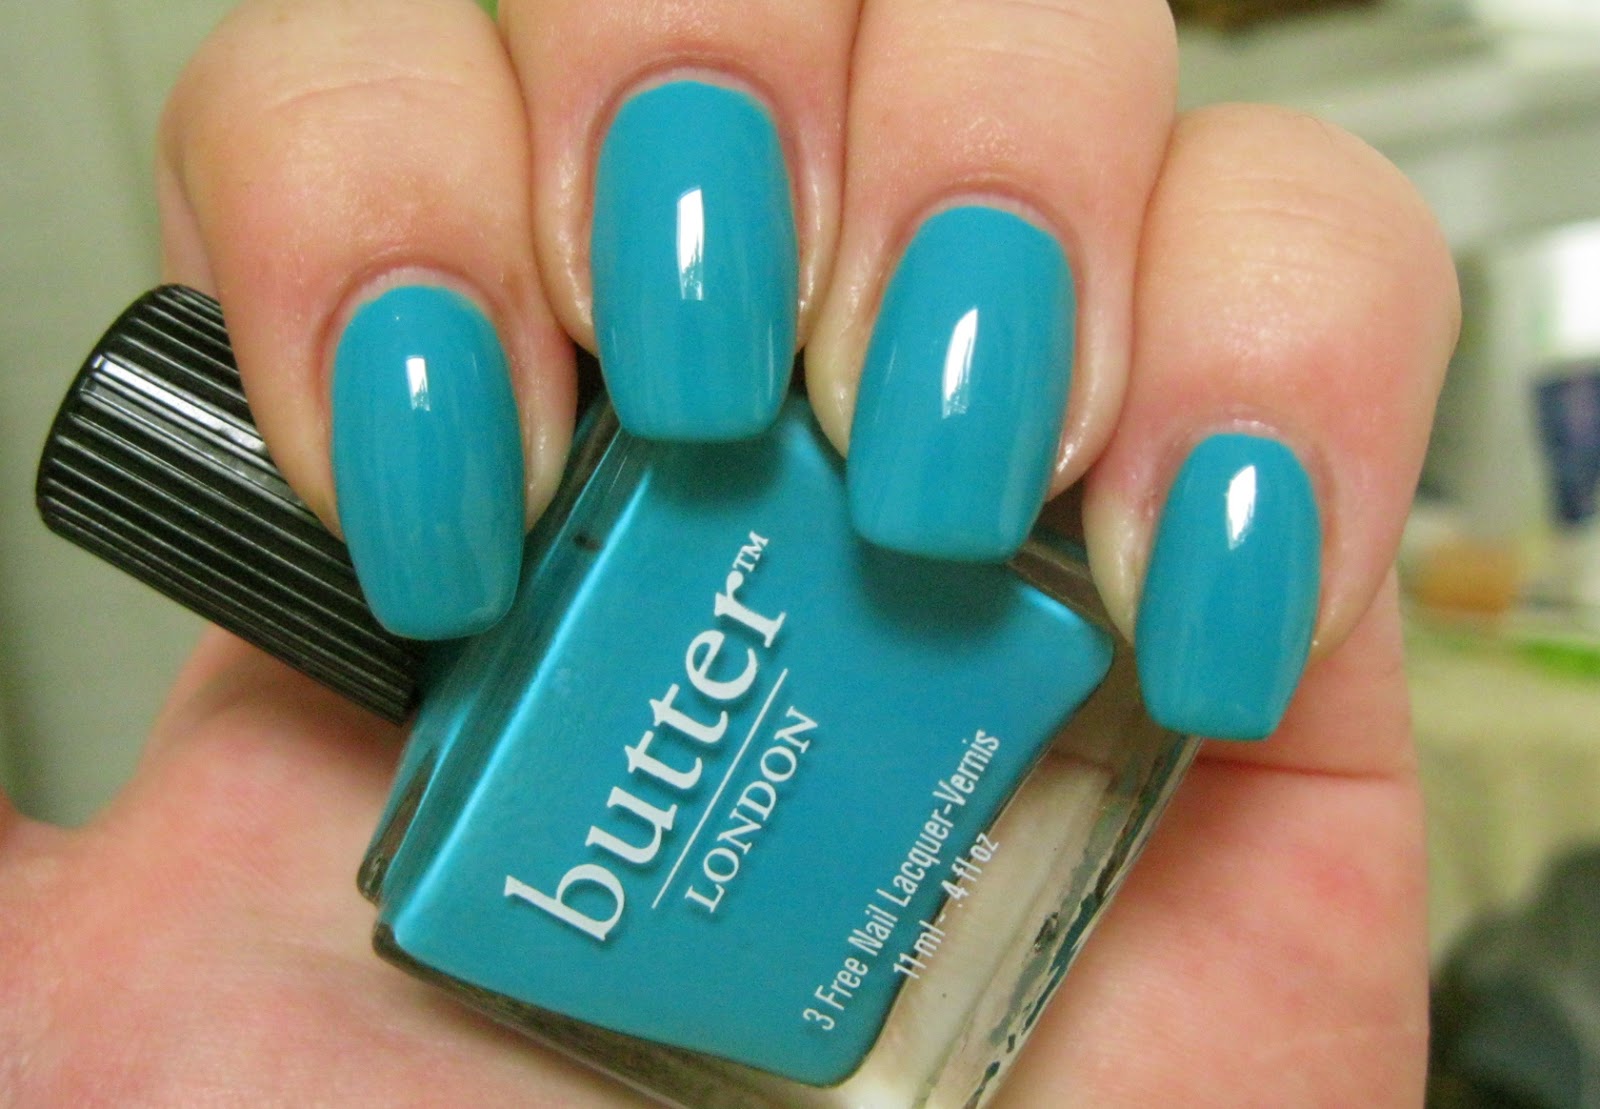 10. Butter London Nail Lacquer in "Slapper" - wide 3